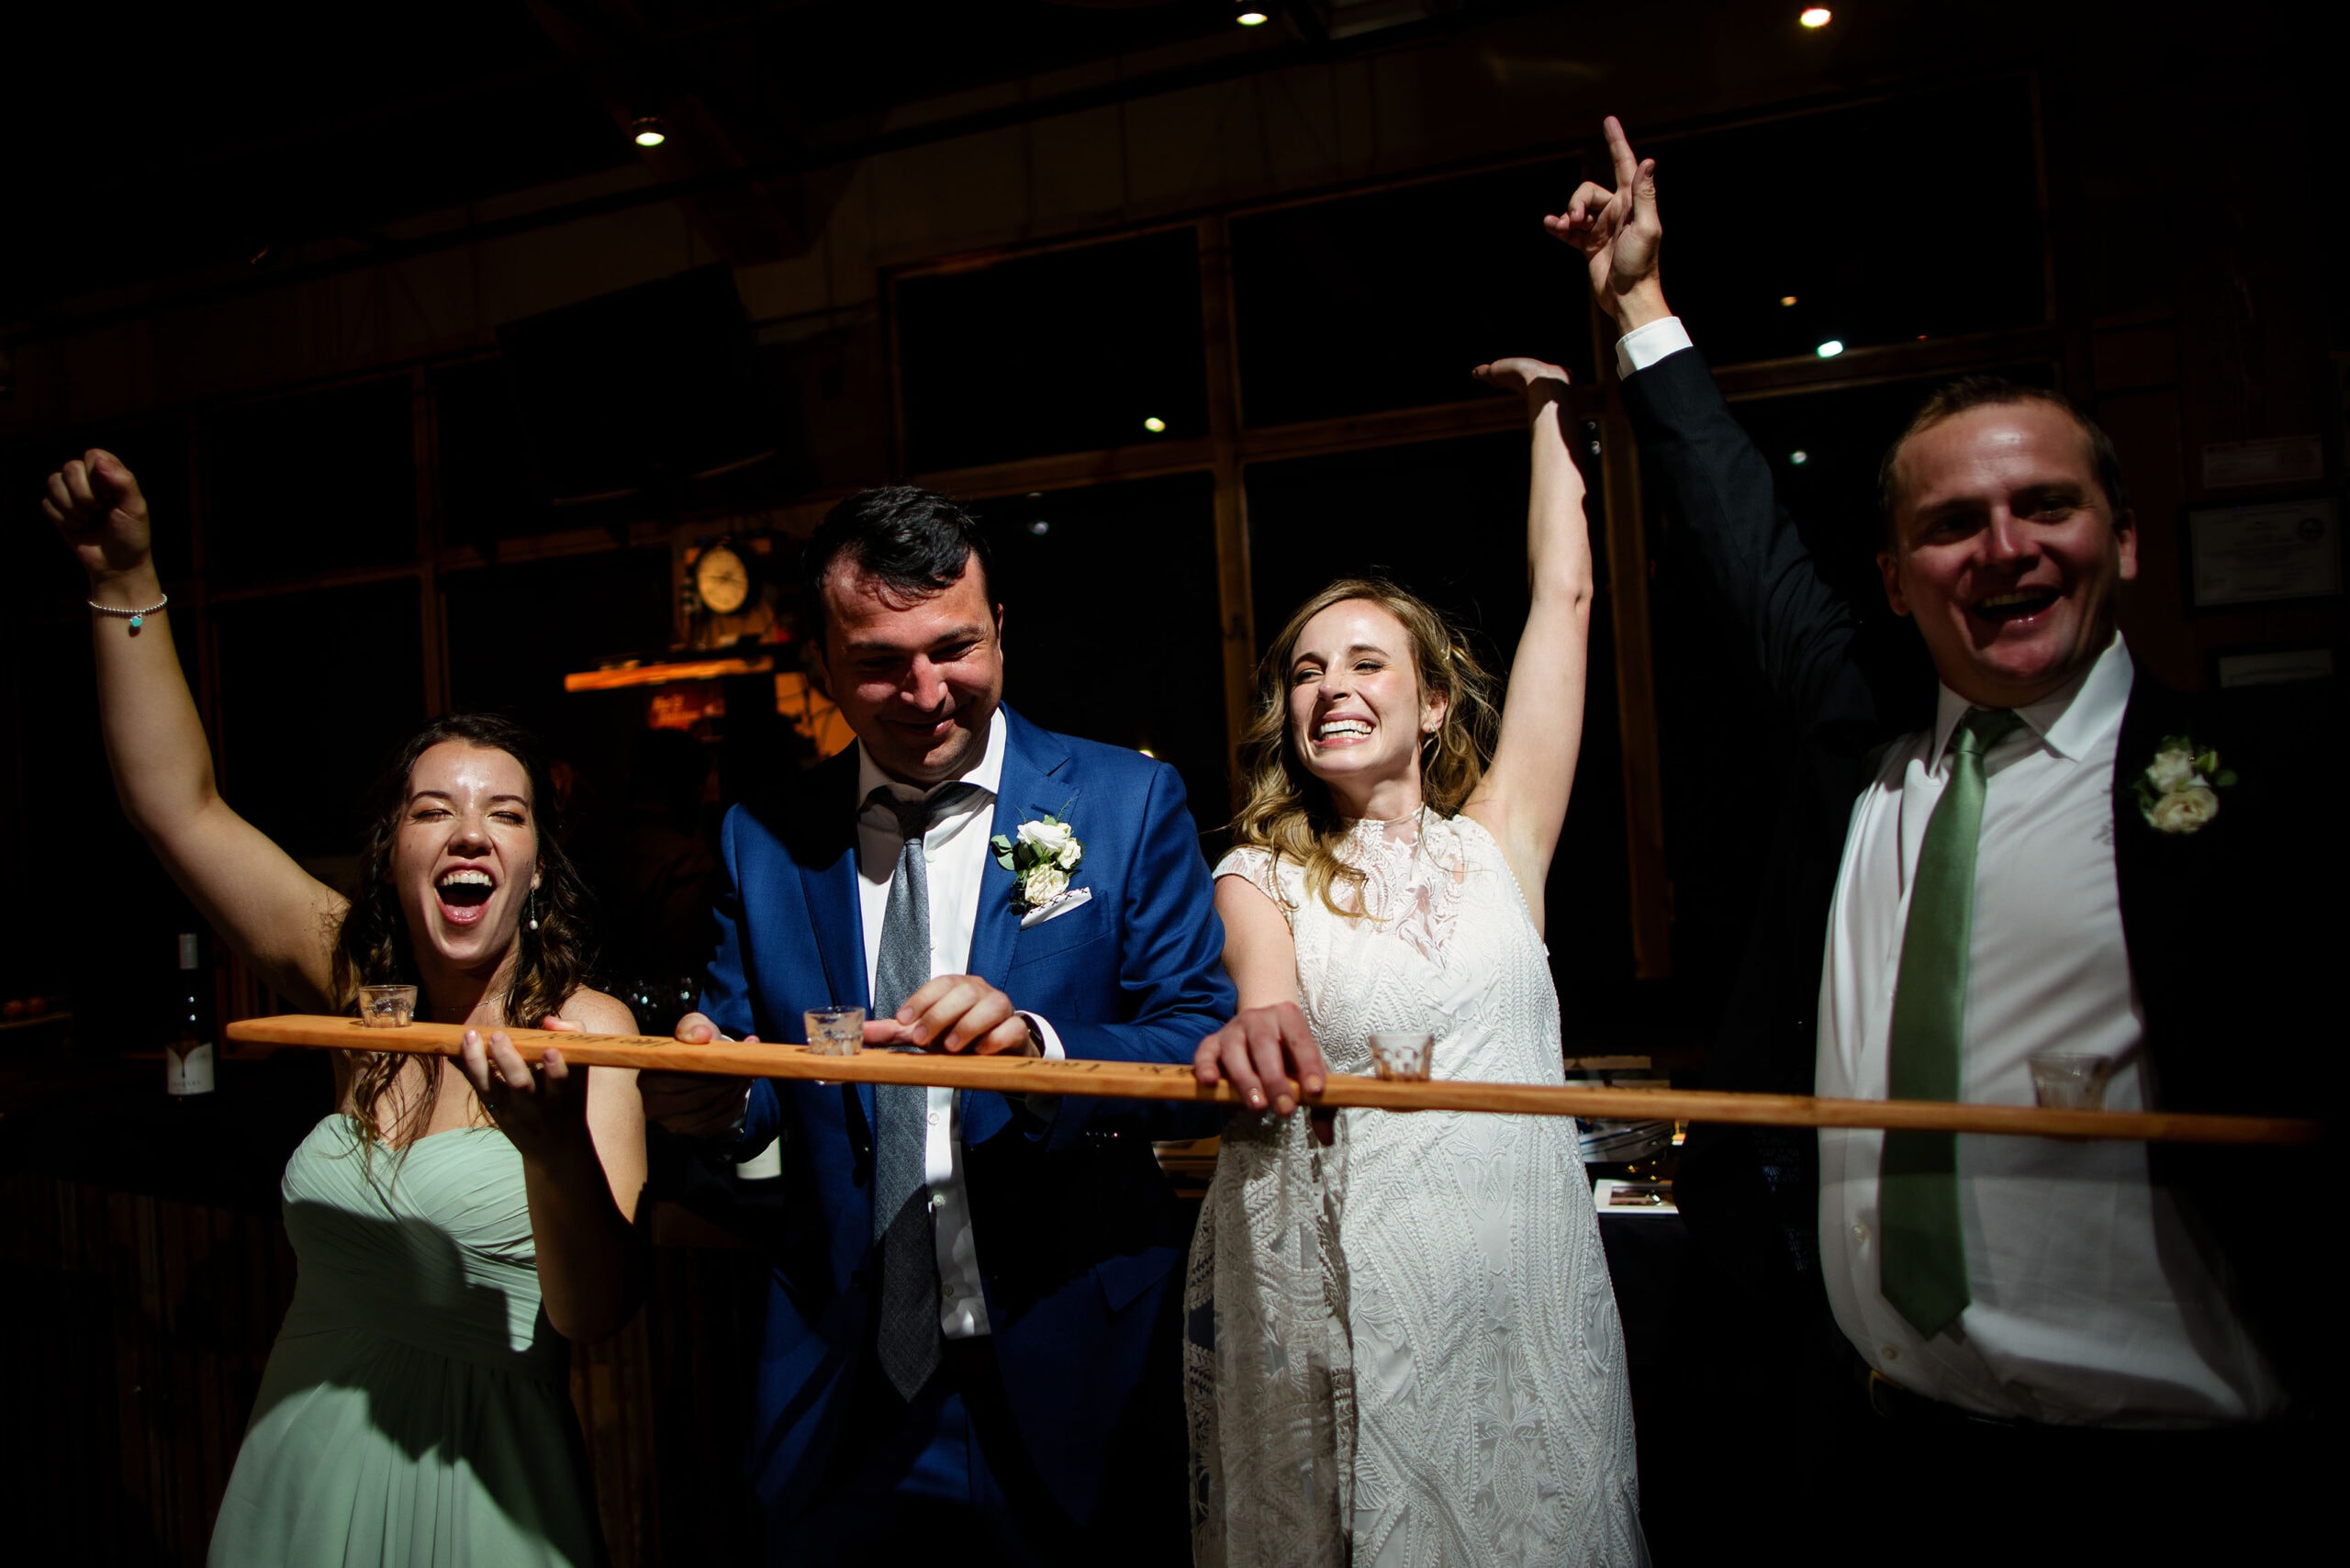 The bride, groom and friends react after taking a shot of liquor on a shotski